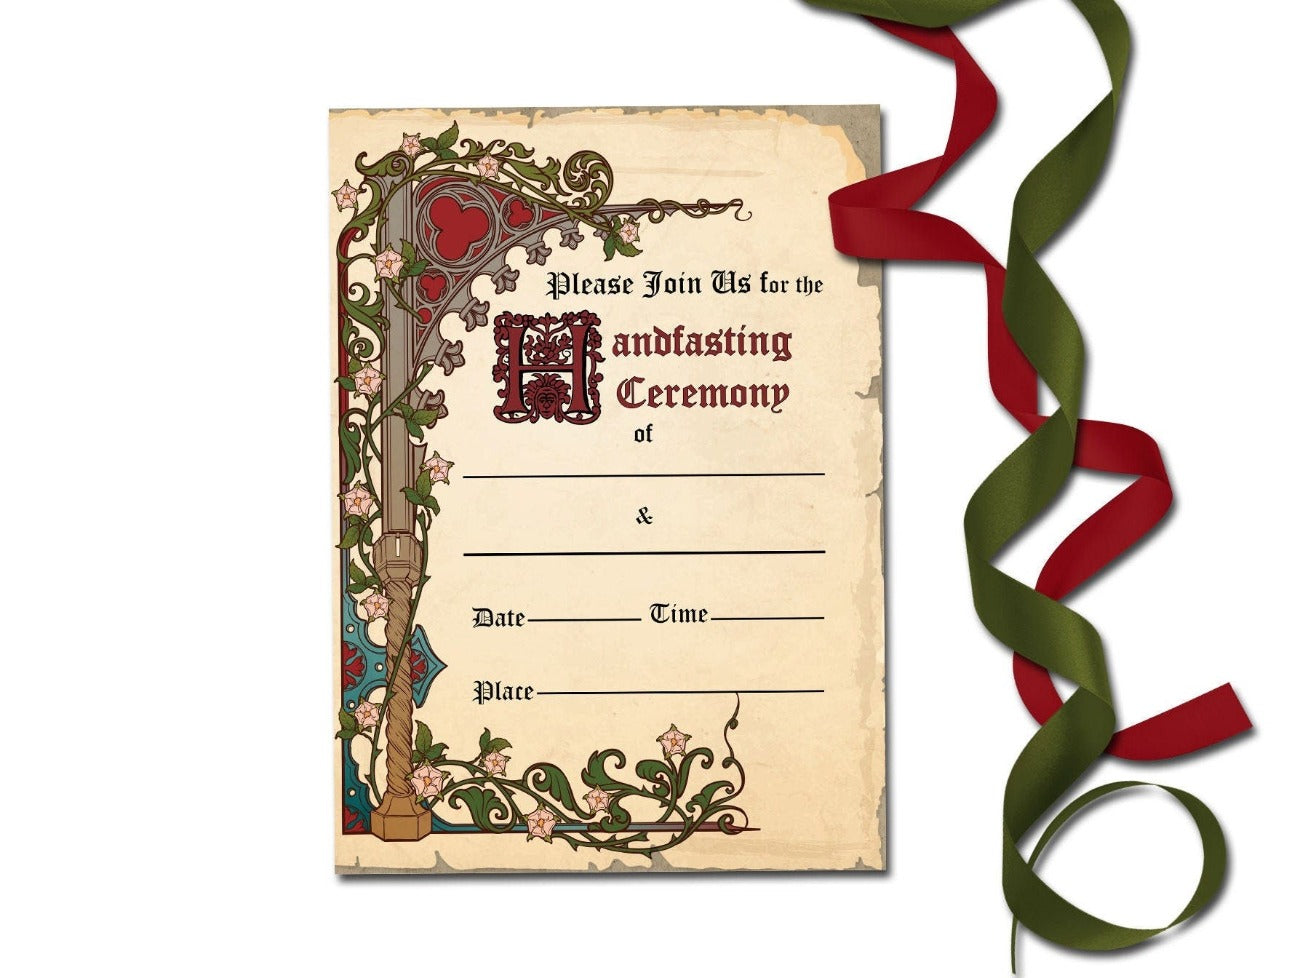 MEDIEVAL HANDFASTING, Printable Certificate & Invitation, Wicca Pagan Wedding Marriage Parchment, Jump the Broom, Witchcraft Cord Binding - Morgana Magick Spell